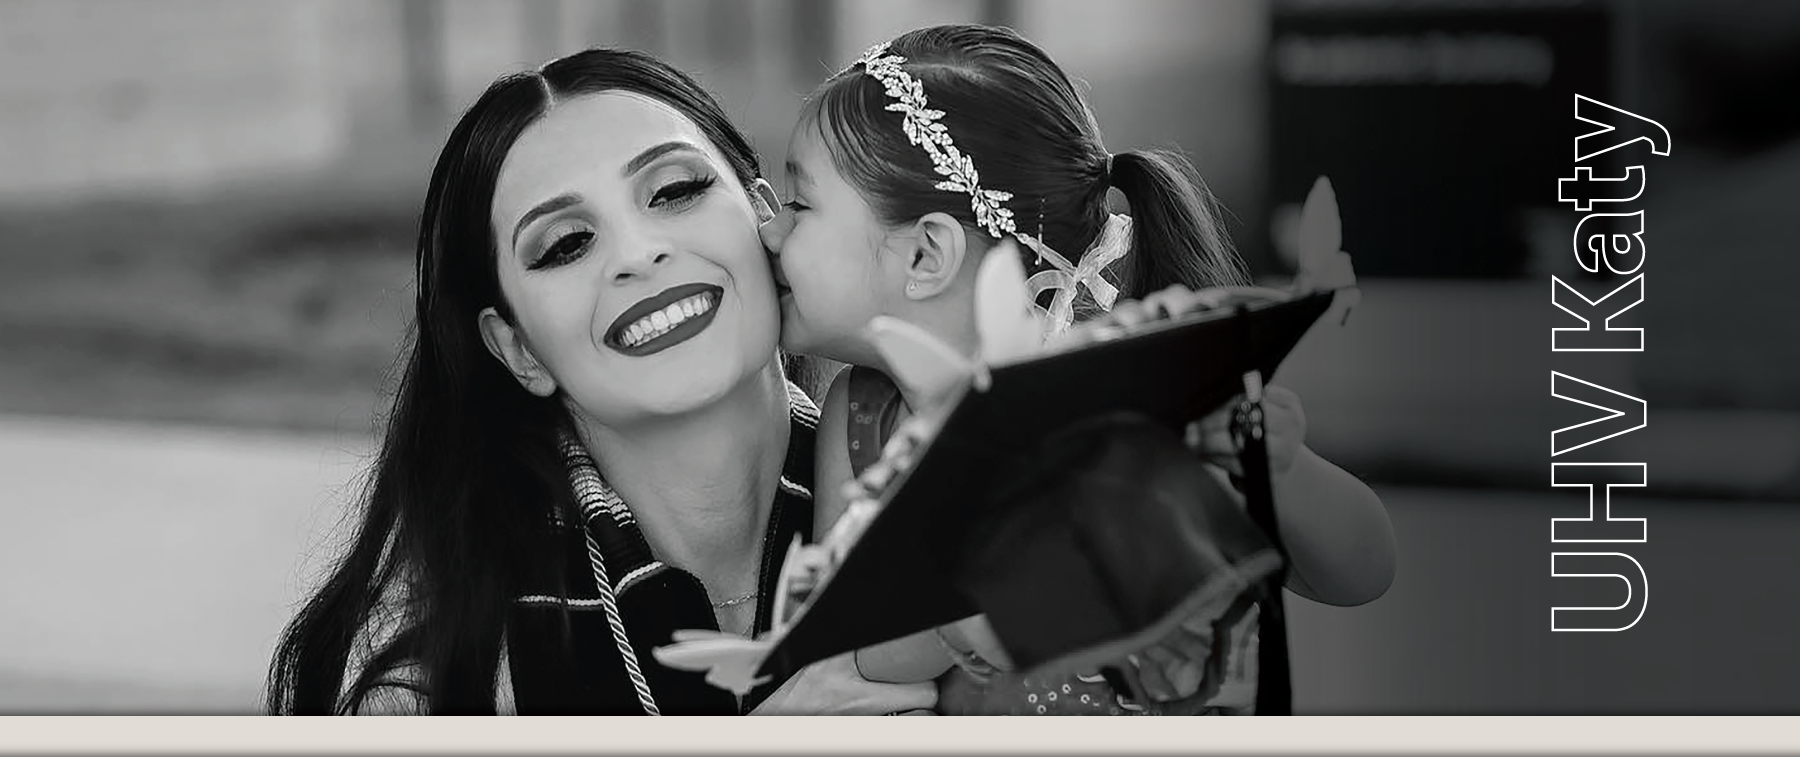 UH Katy graduate being kissed on her cheek by her young daughter